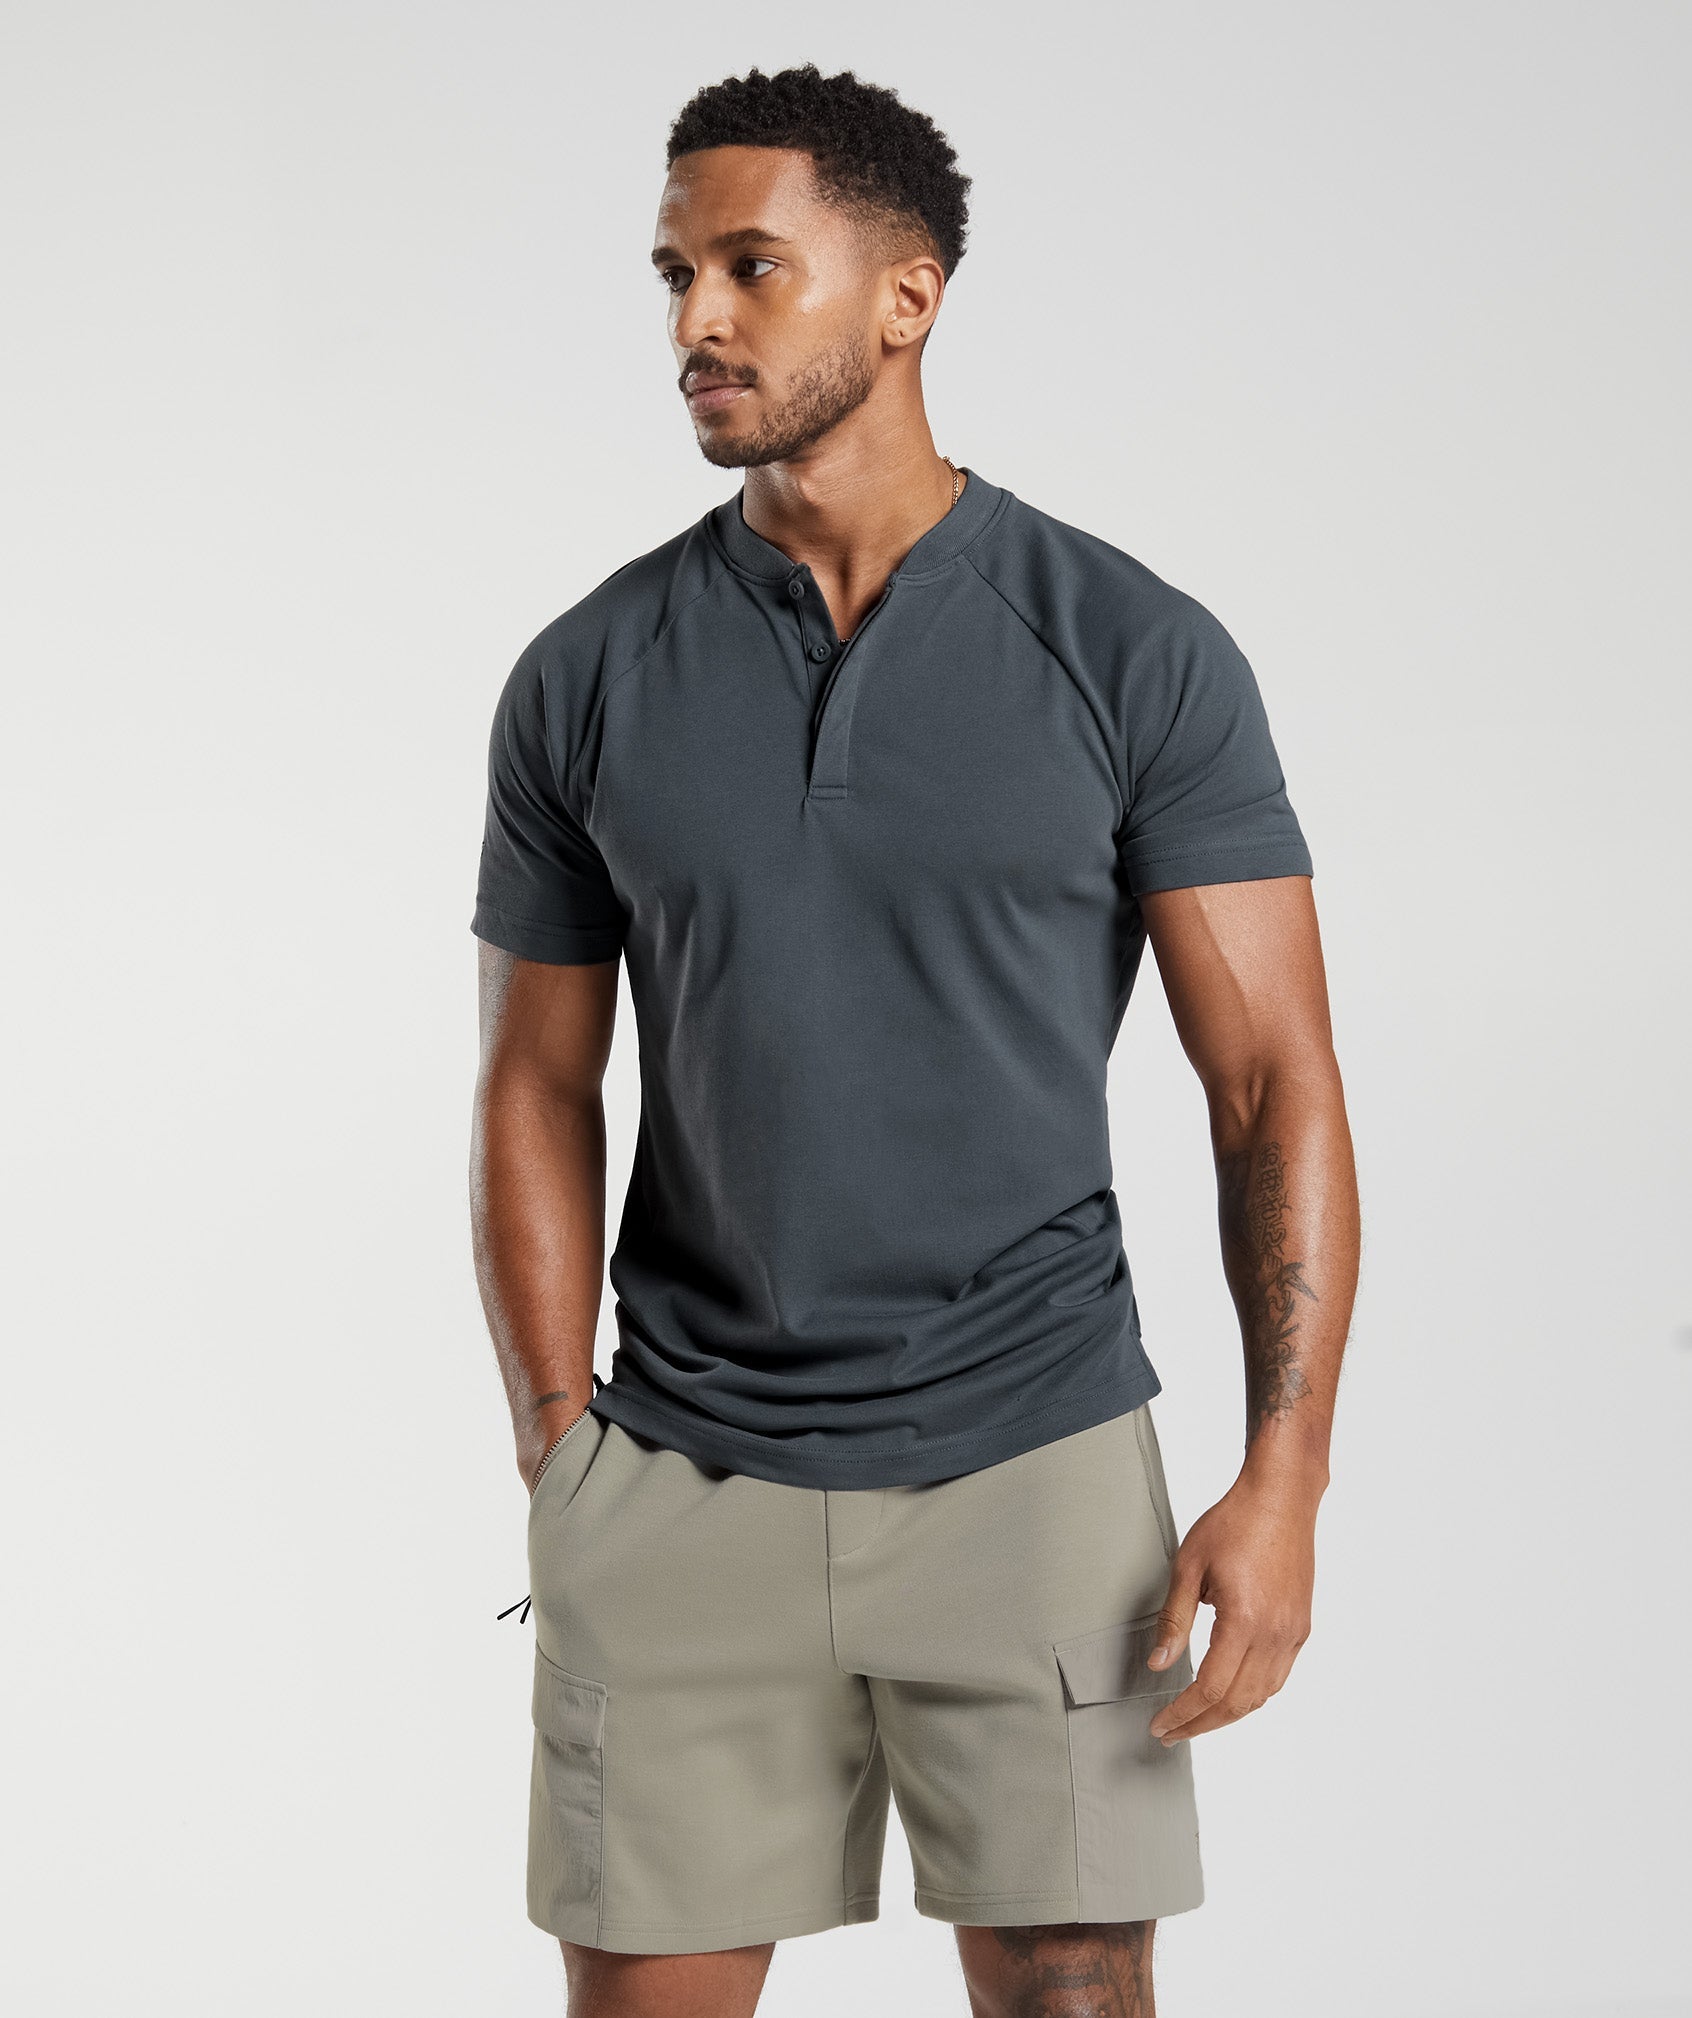 Rest Day Commute Polo Shirt in Cosmic Grey - view 1